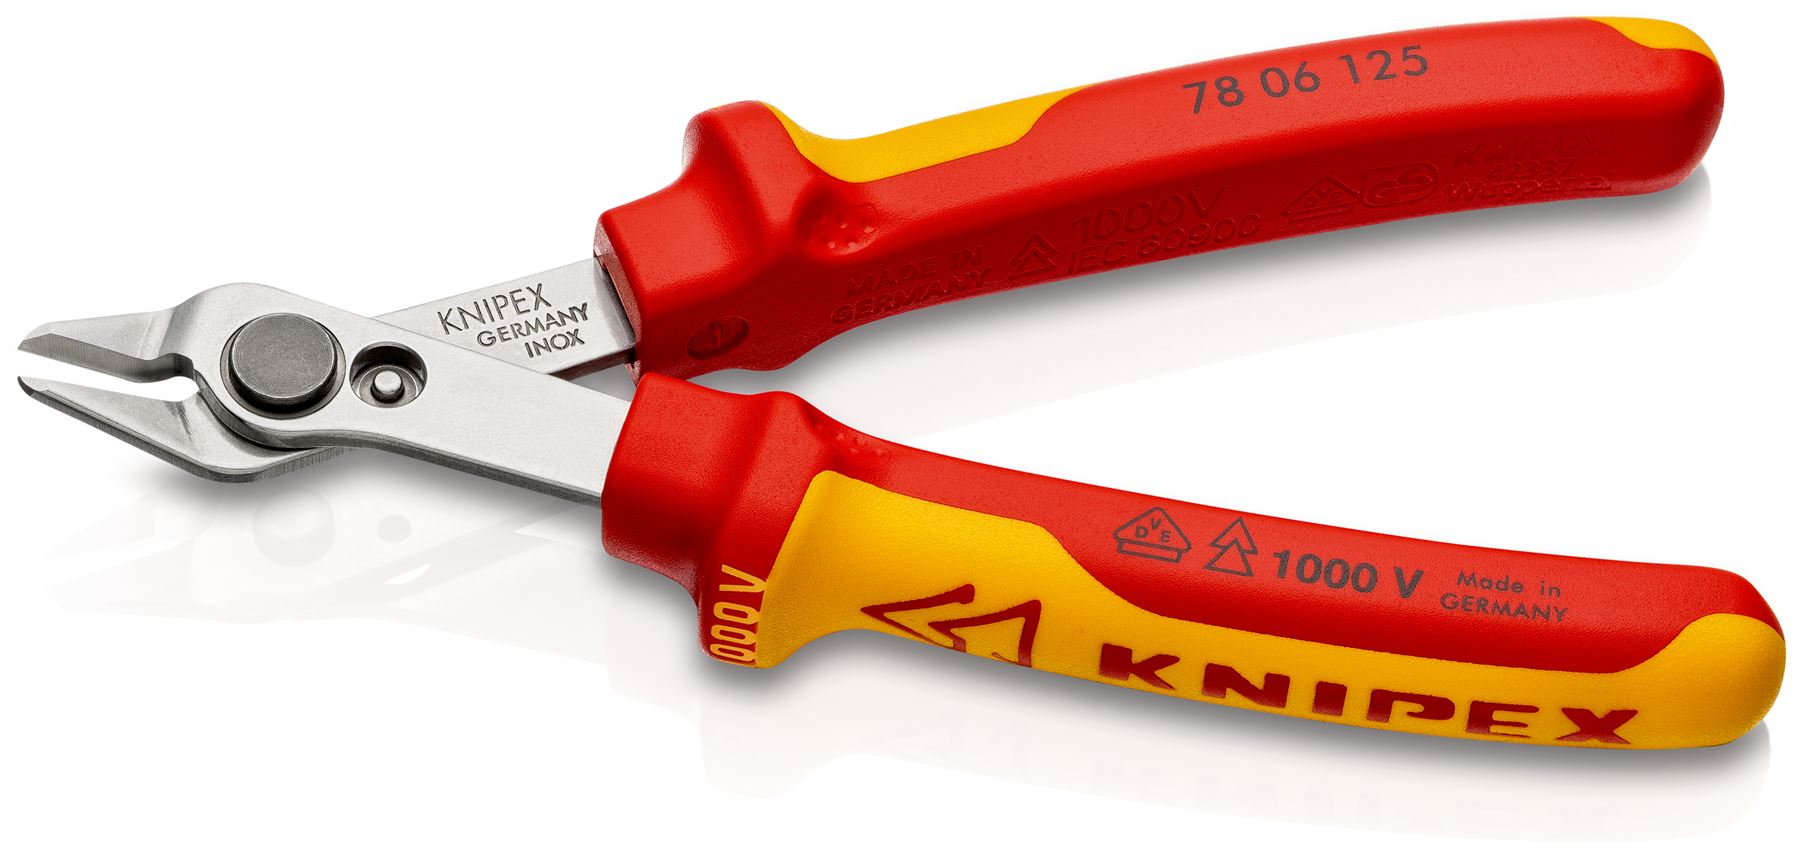 KNIPEX Electronics Super Knips Precision Cutting Pliers 125mm VDE Multi Component Grips 78 06 125 SB